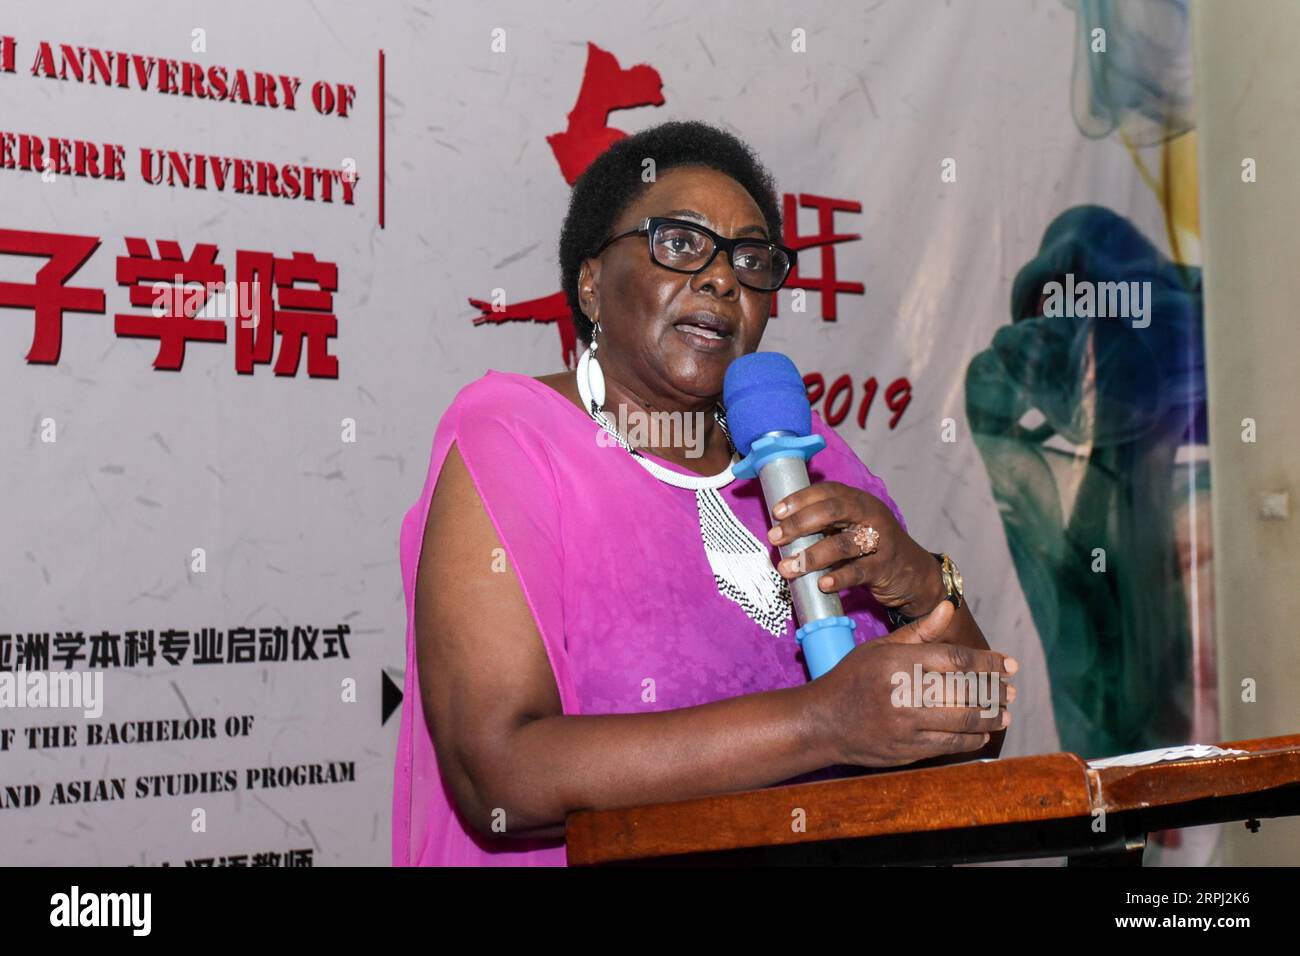 191124 -- KAMPALA, Nov. 24, 2019 Xinhua -- Mary Karoro, Uganda s minister in charge of general duties at the Office of Prime Minister, speaks during an event celebrating the 5th anniversary of the founding of the institute, in Kampala, Uganda, Nov. 23, 2019. Confucius Institute at Makerere University, Uganda s top university, on Saturday celebrated its fifth anniversary. The institution, as the nexus of Chinese language teaching, is playing a major role for cultural exchange between Uganda and China. Photo by Hajarah Nalwadda/Xinhua UGANDA-KAMPALA-MAKERERE UNIVERSITY-CONFUCIUS INSTITUTE-ANNIVE Stock Photo